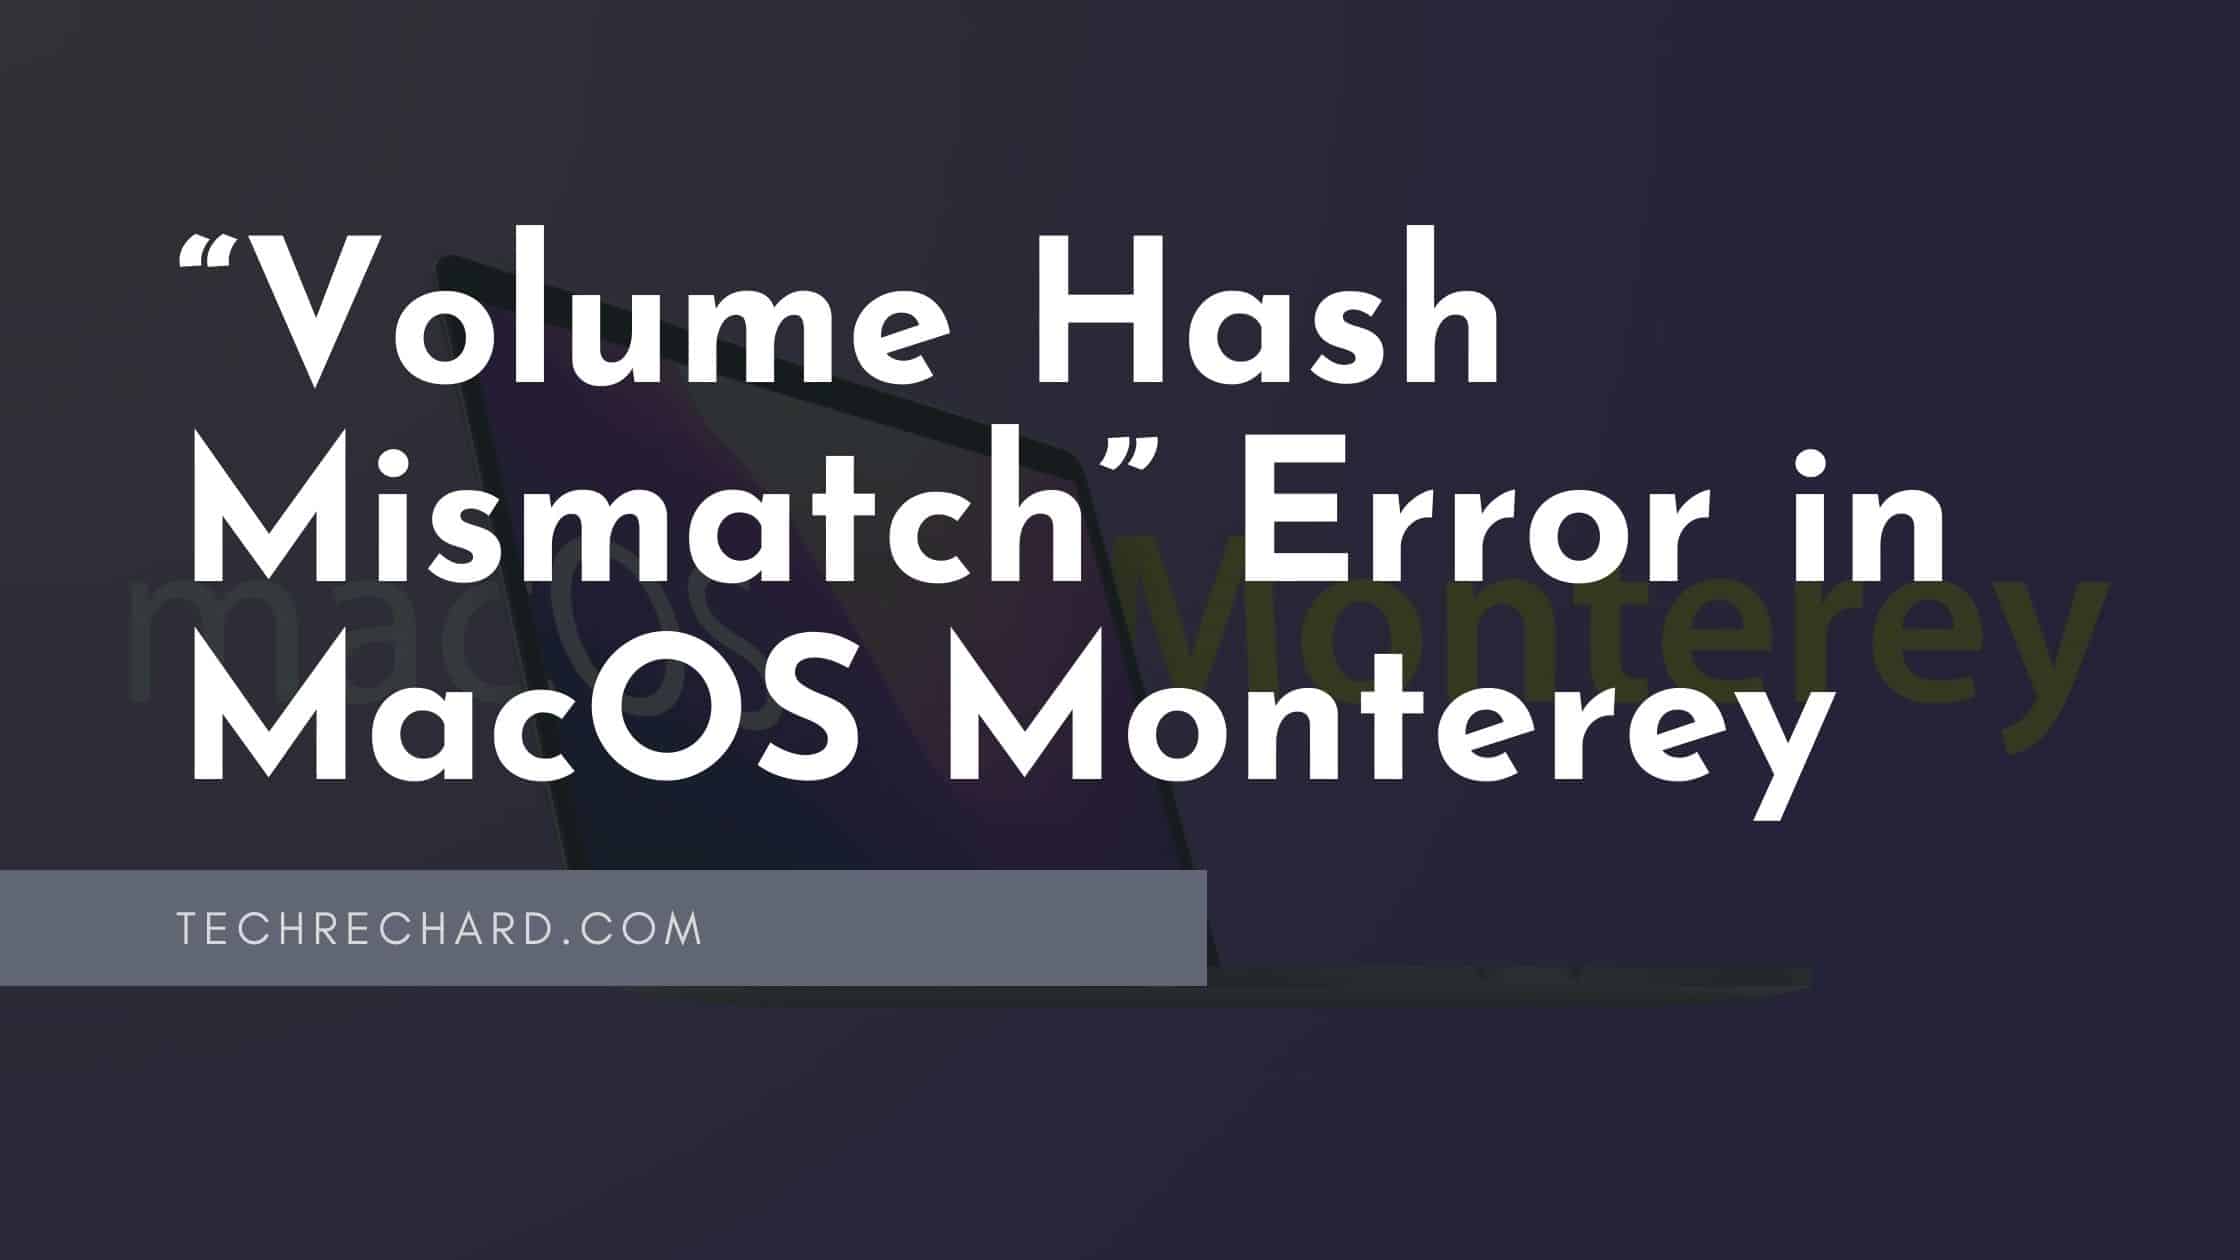 “Volume Hash Mismatch” Error in MacOS Monterey: Here's what you can do.